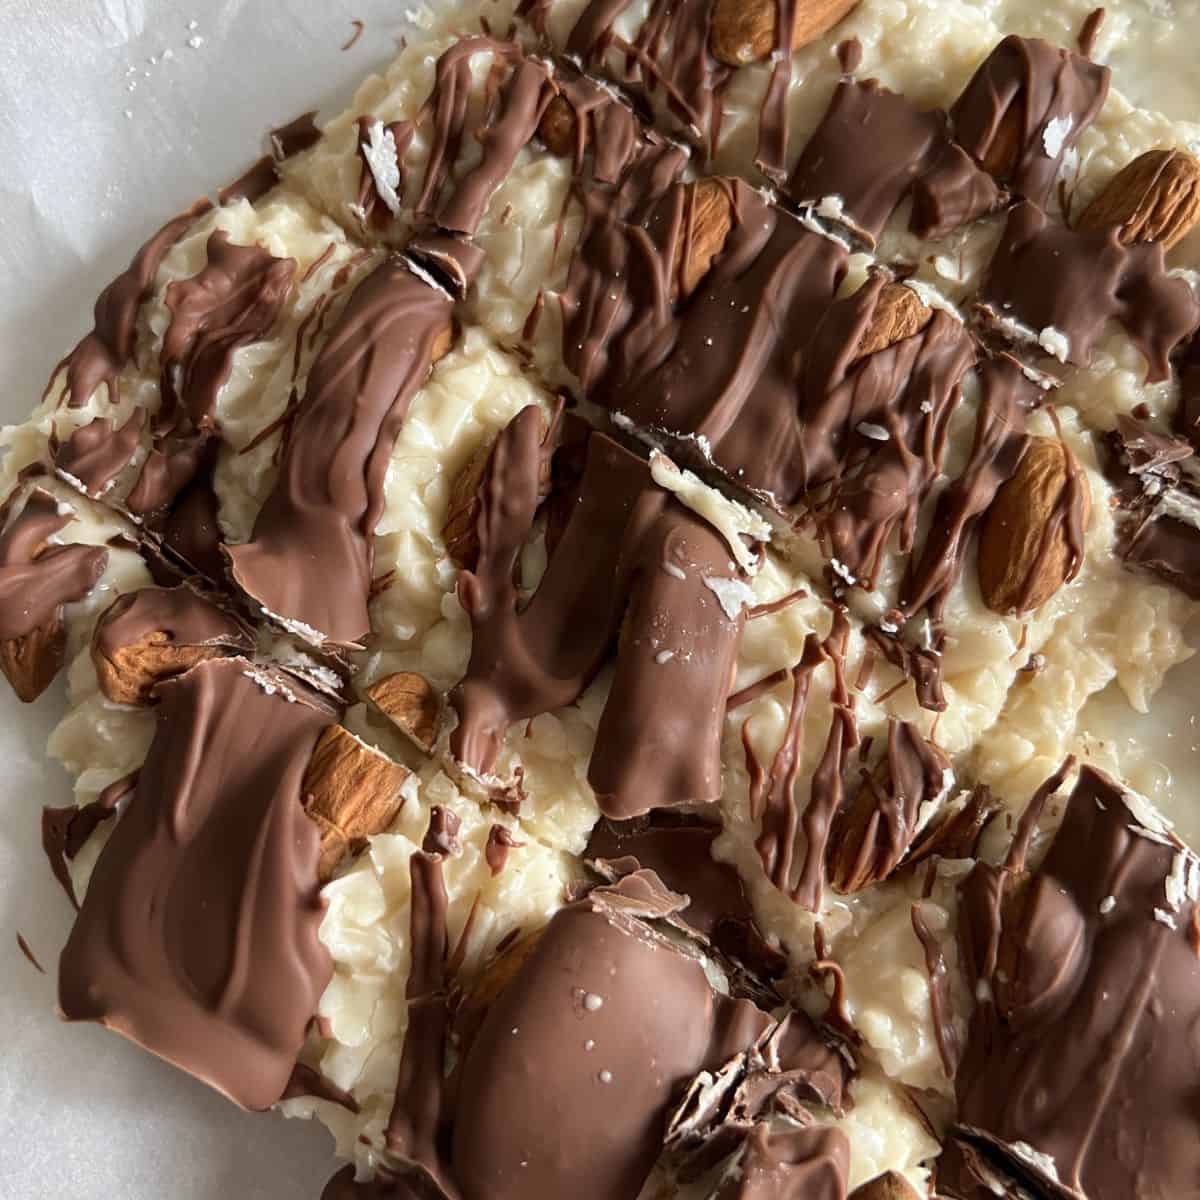 Homemade almond joy bars drizzled with chocolate. 